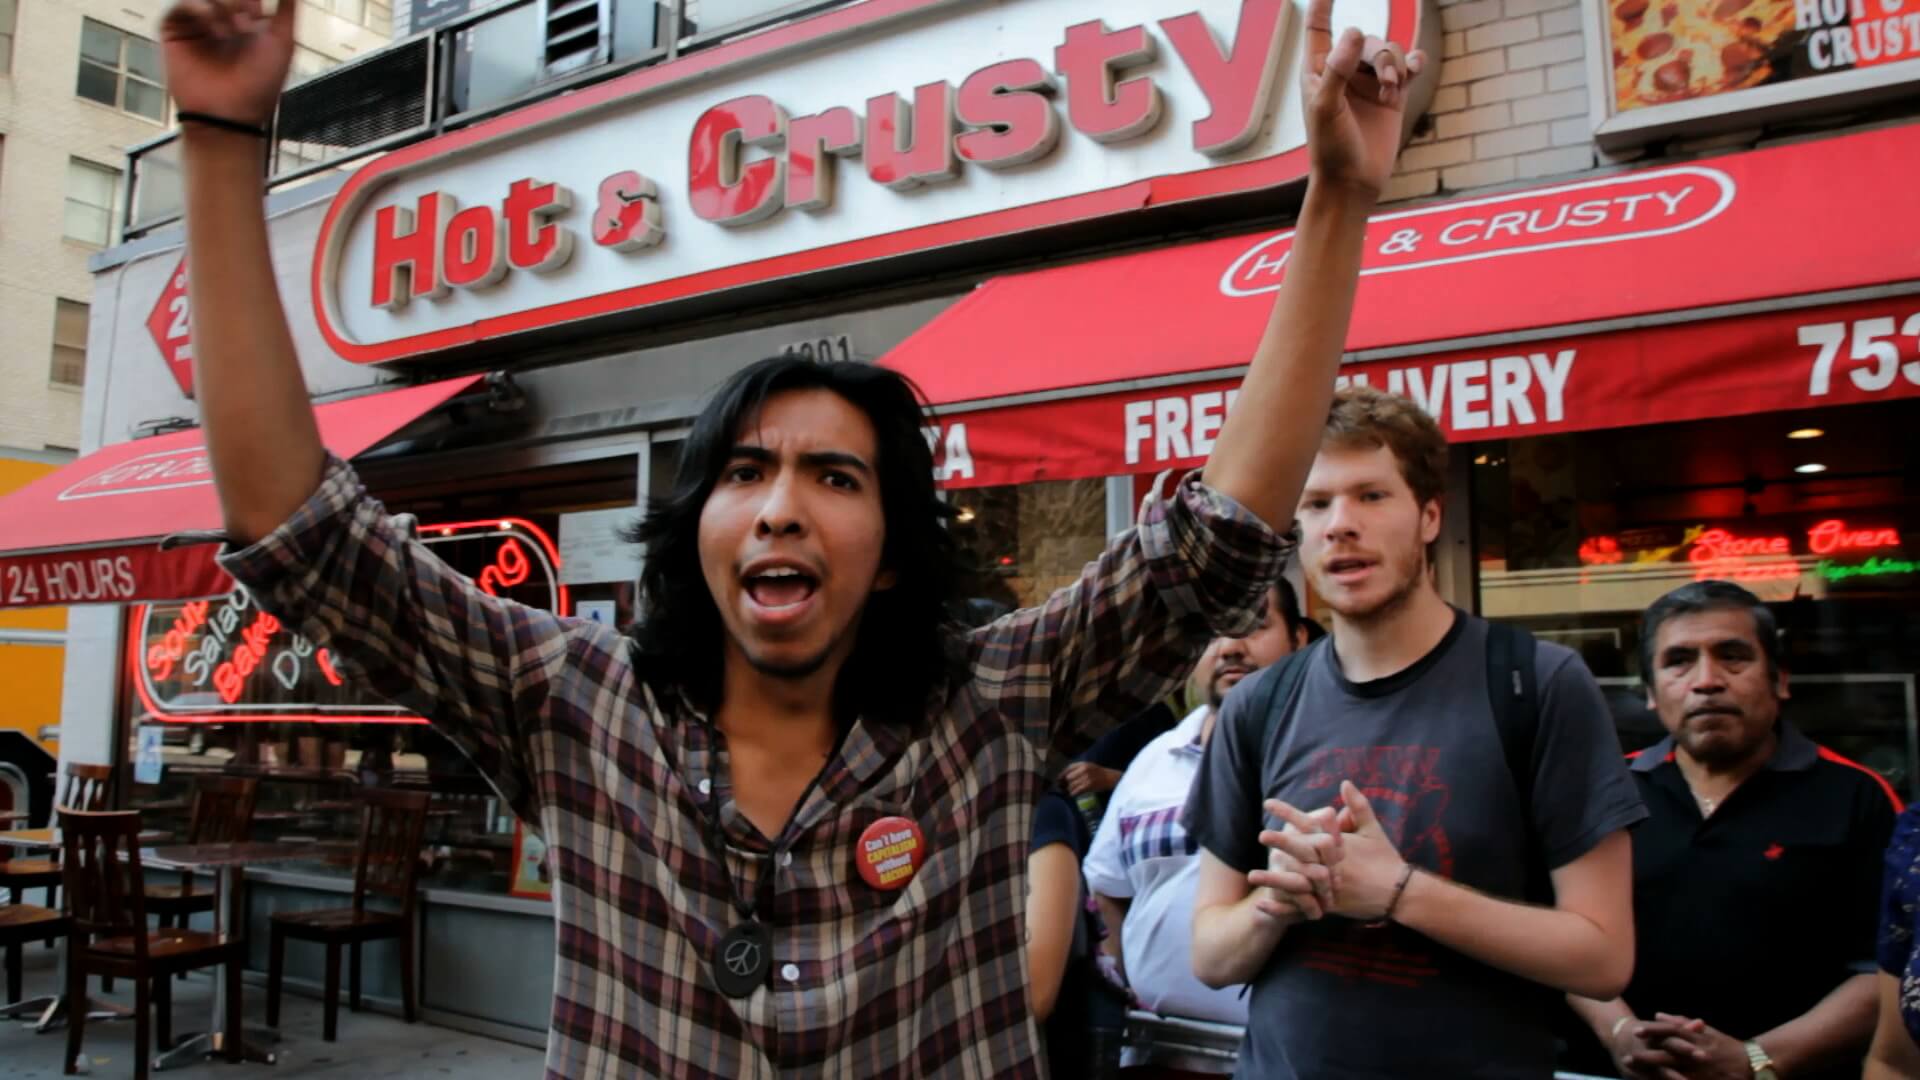 A group of people stands in front of a restaurant. The restaurant sign says "Hot & Crusty". The front-most person in the group holds both of their fists in the air and looks directly at the camera.